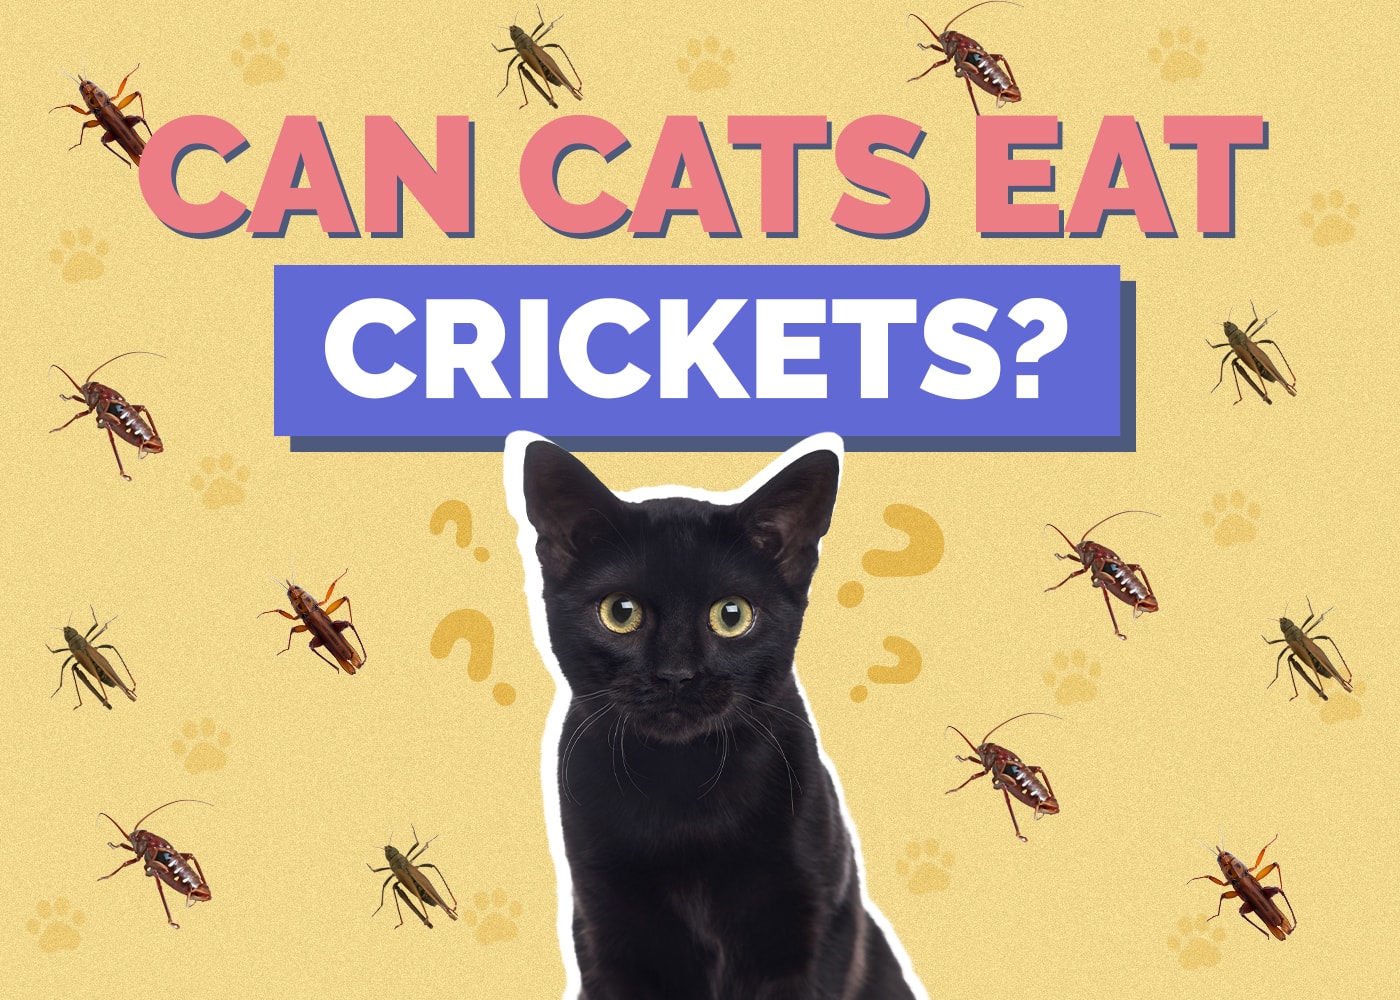 Can Cats Eat crickets